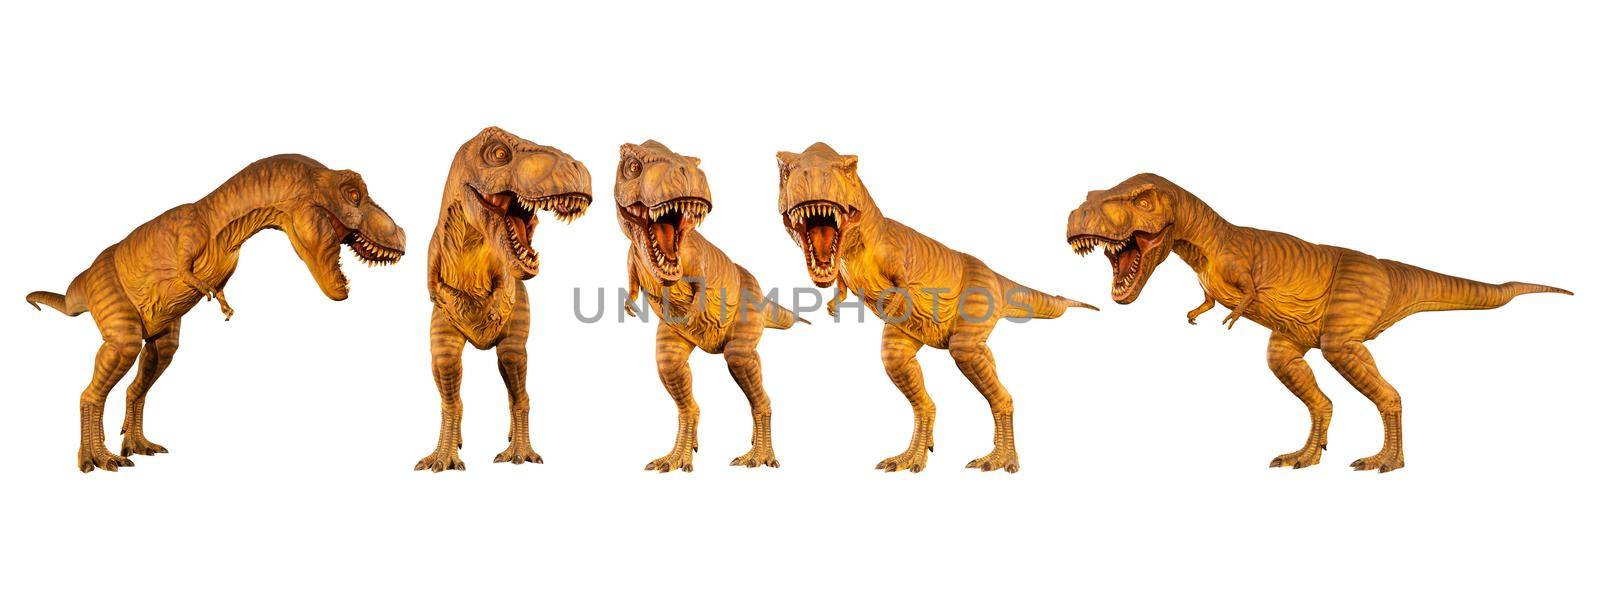 Tyrannosaurus rex ( T-rex ) is walking and snarling . Set of various dinosaur posture . White isolated background . by stockdevil